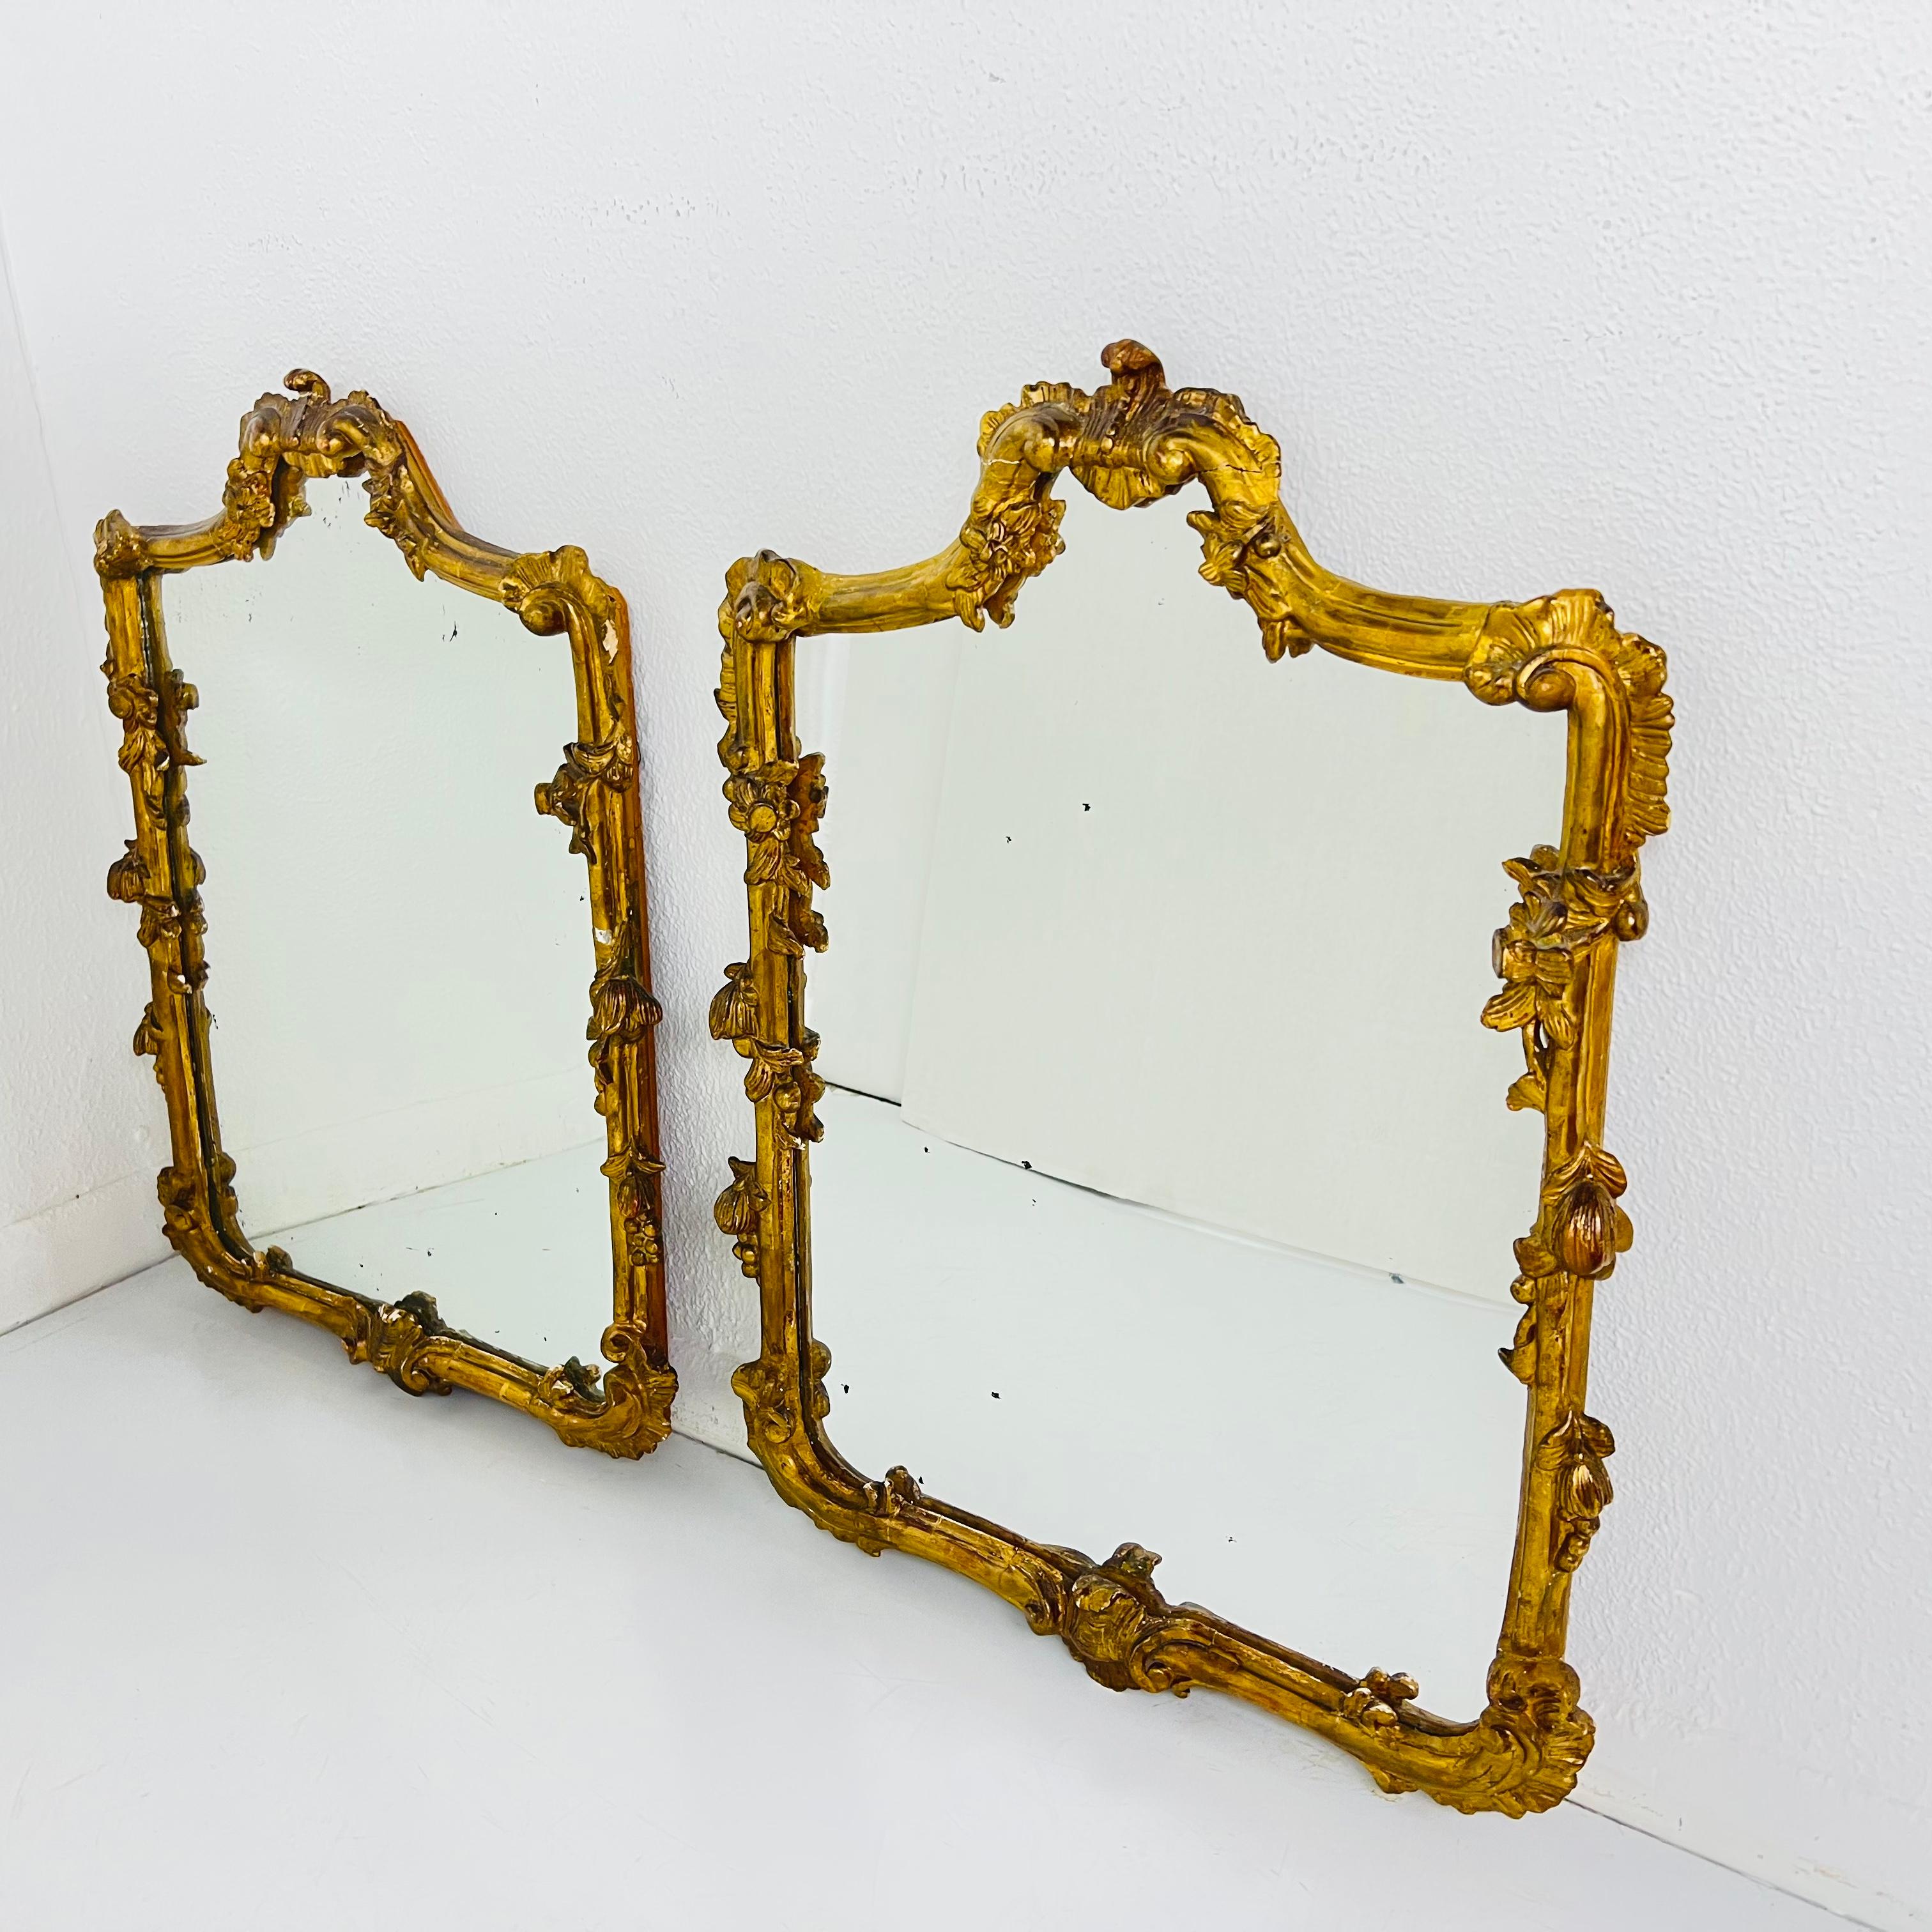 Gilt Pair of Ornate Gilded Plaster and Wood Wall Mirrors